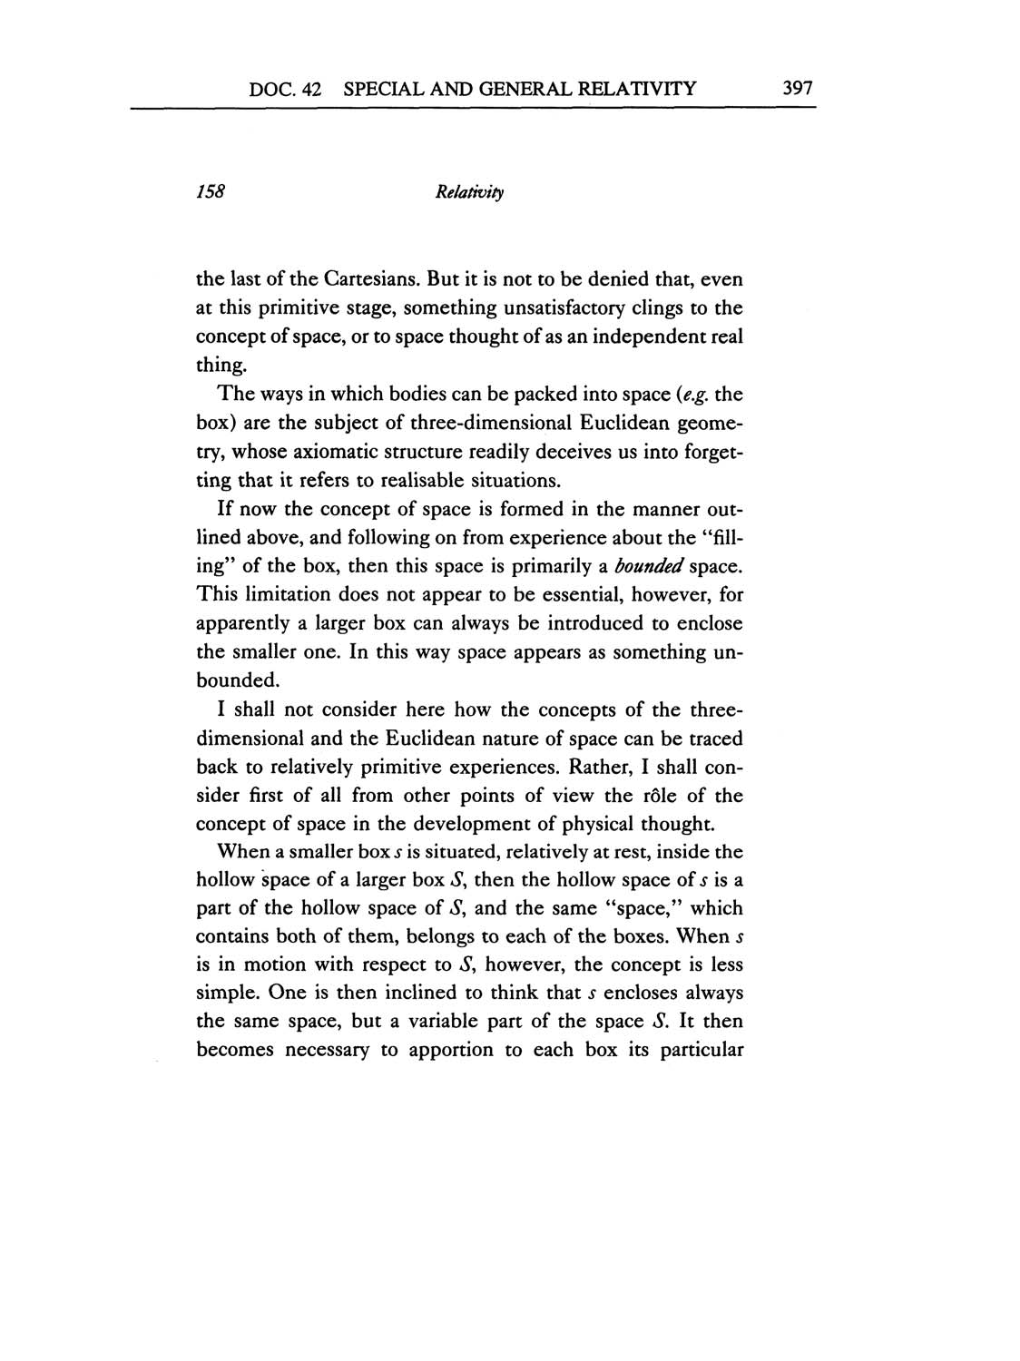 Volume 6: The Berlin Years: Writings, 1914-1917 (English translation supplement) page 397